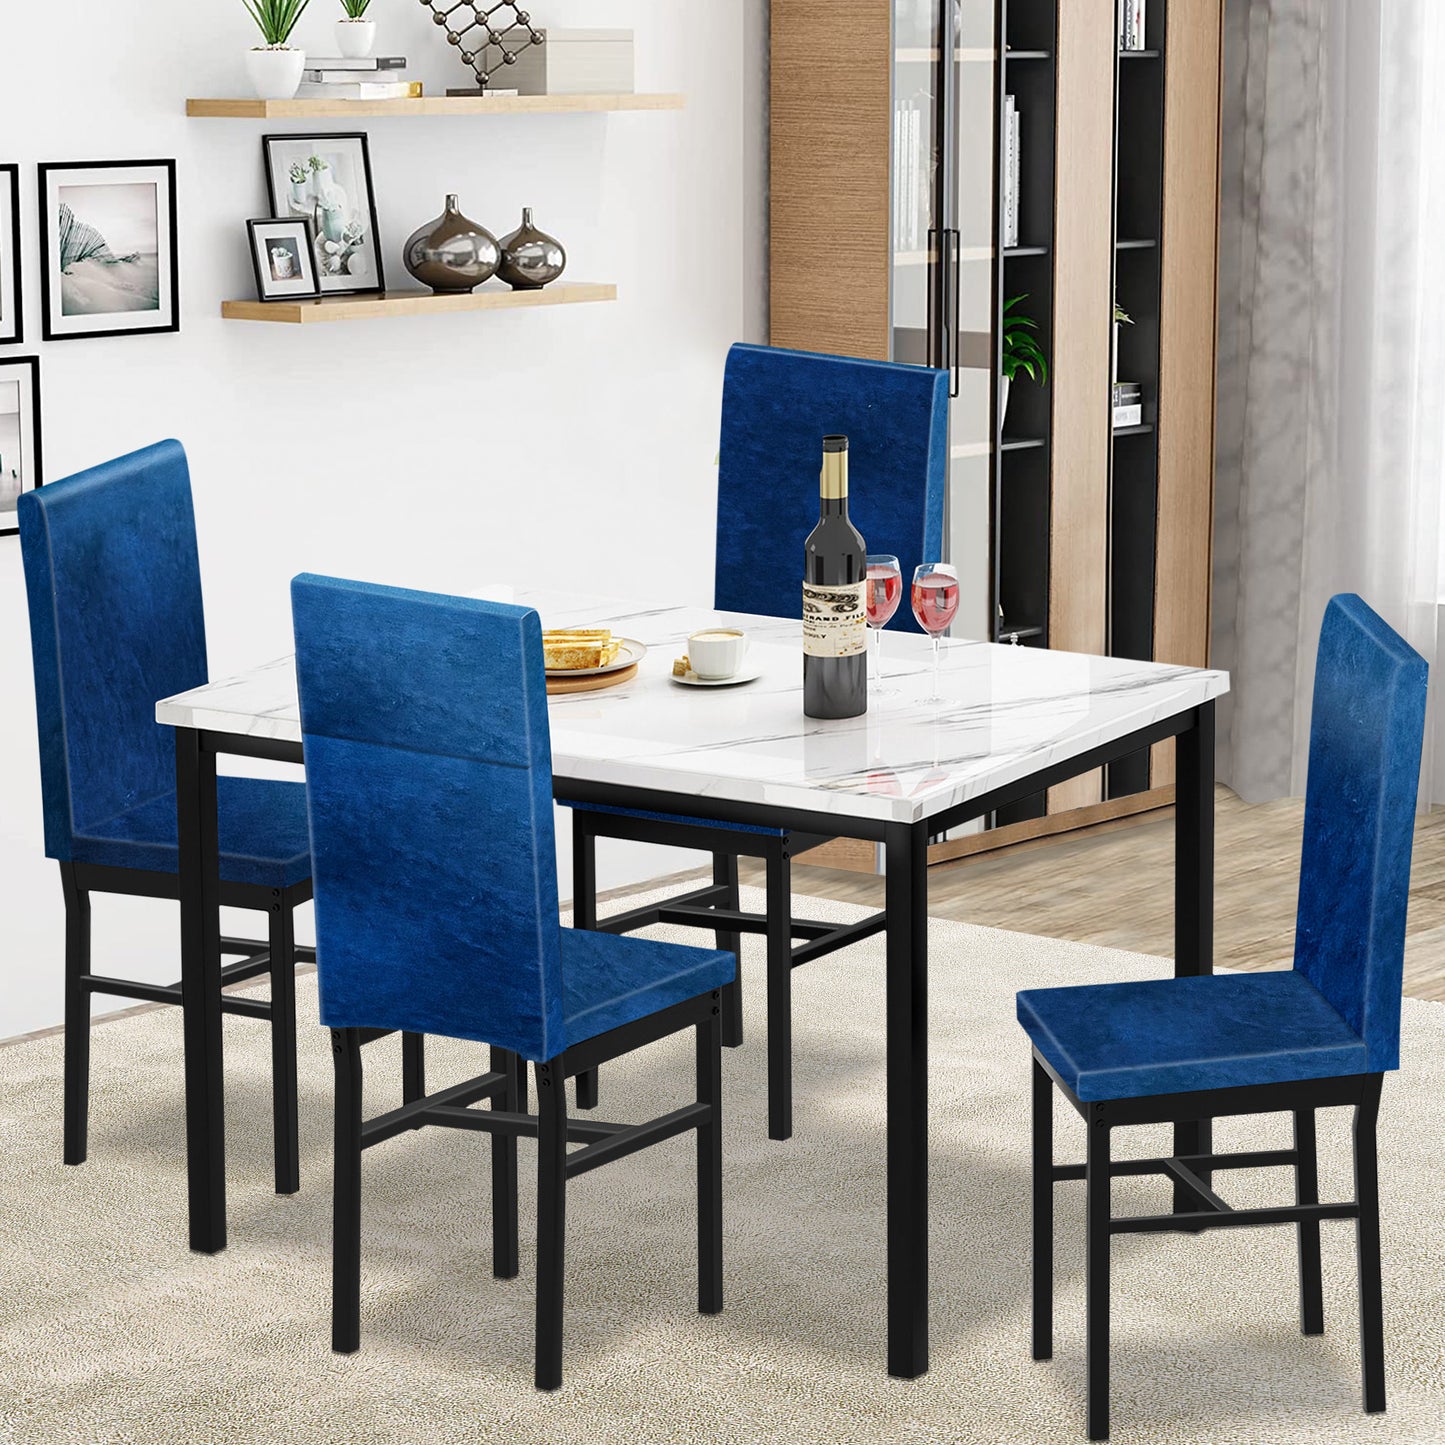 Modern Dining Table Set for 4, Faux Marble Table and PU Leather Upholstered Chairs Set, 5 Piece Kitchen Dining Set, Dining Table and Chairs Set for Small Space, Breakfast Nook, White, D8527